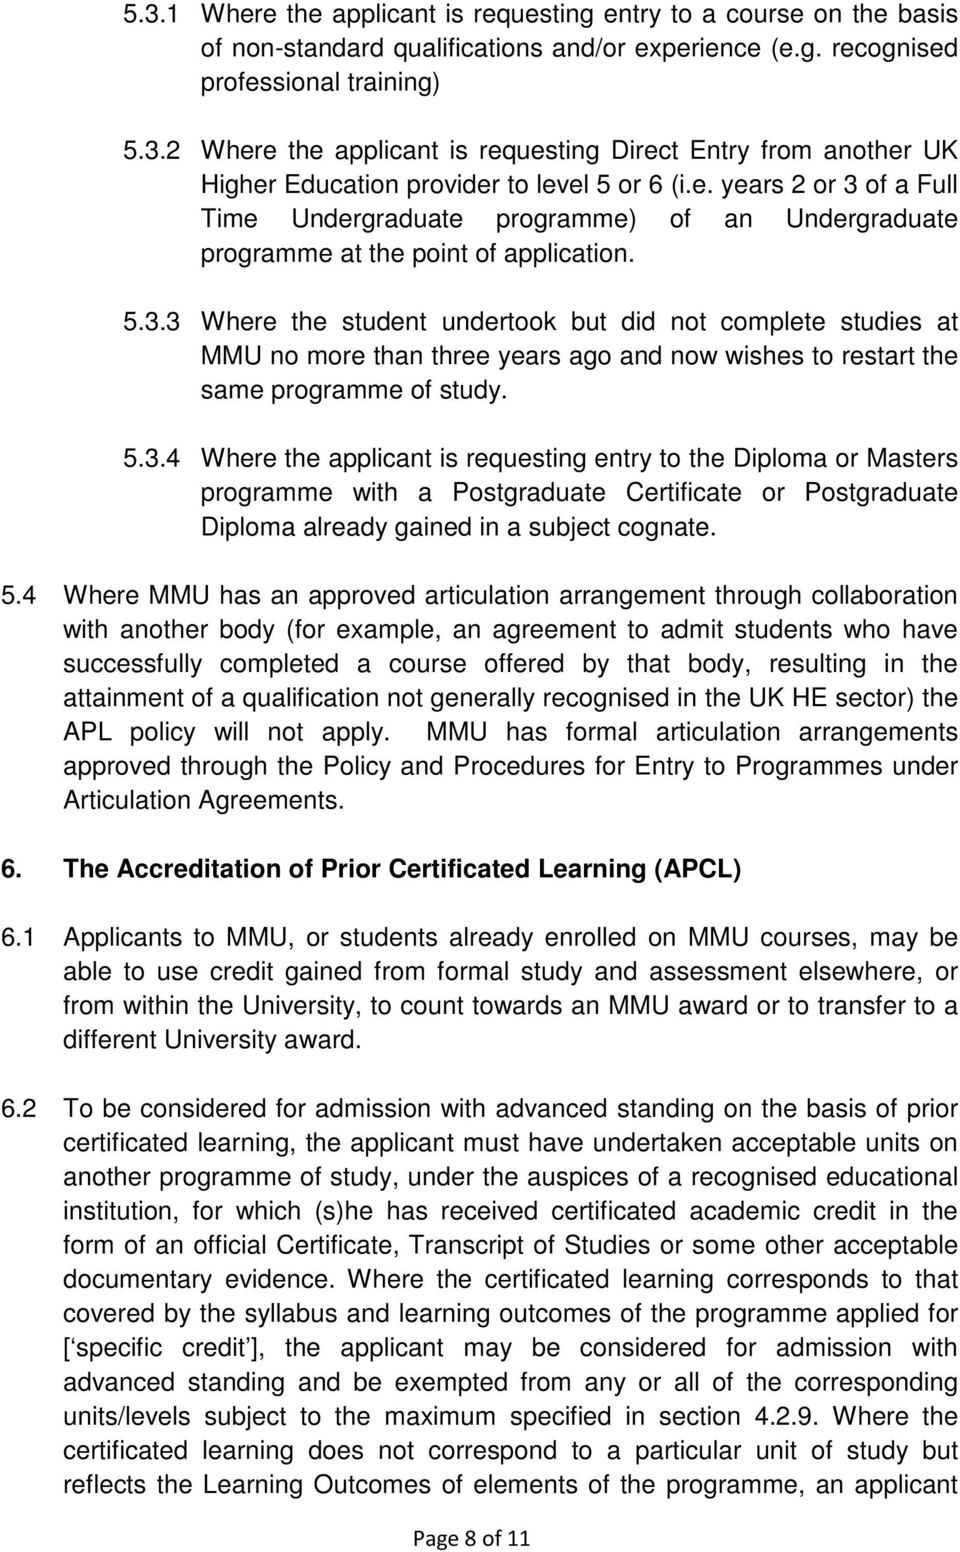 5.3.4 Where the applicant is requesting entry to the Diploma or Masters programme with a Postgraduate Certificate or Postgraduate Diploma already gained in a subject cognate. 5.